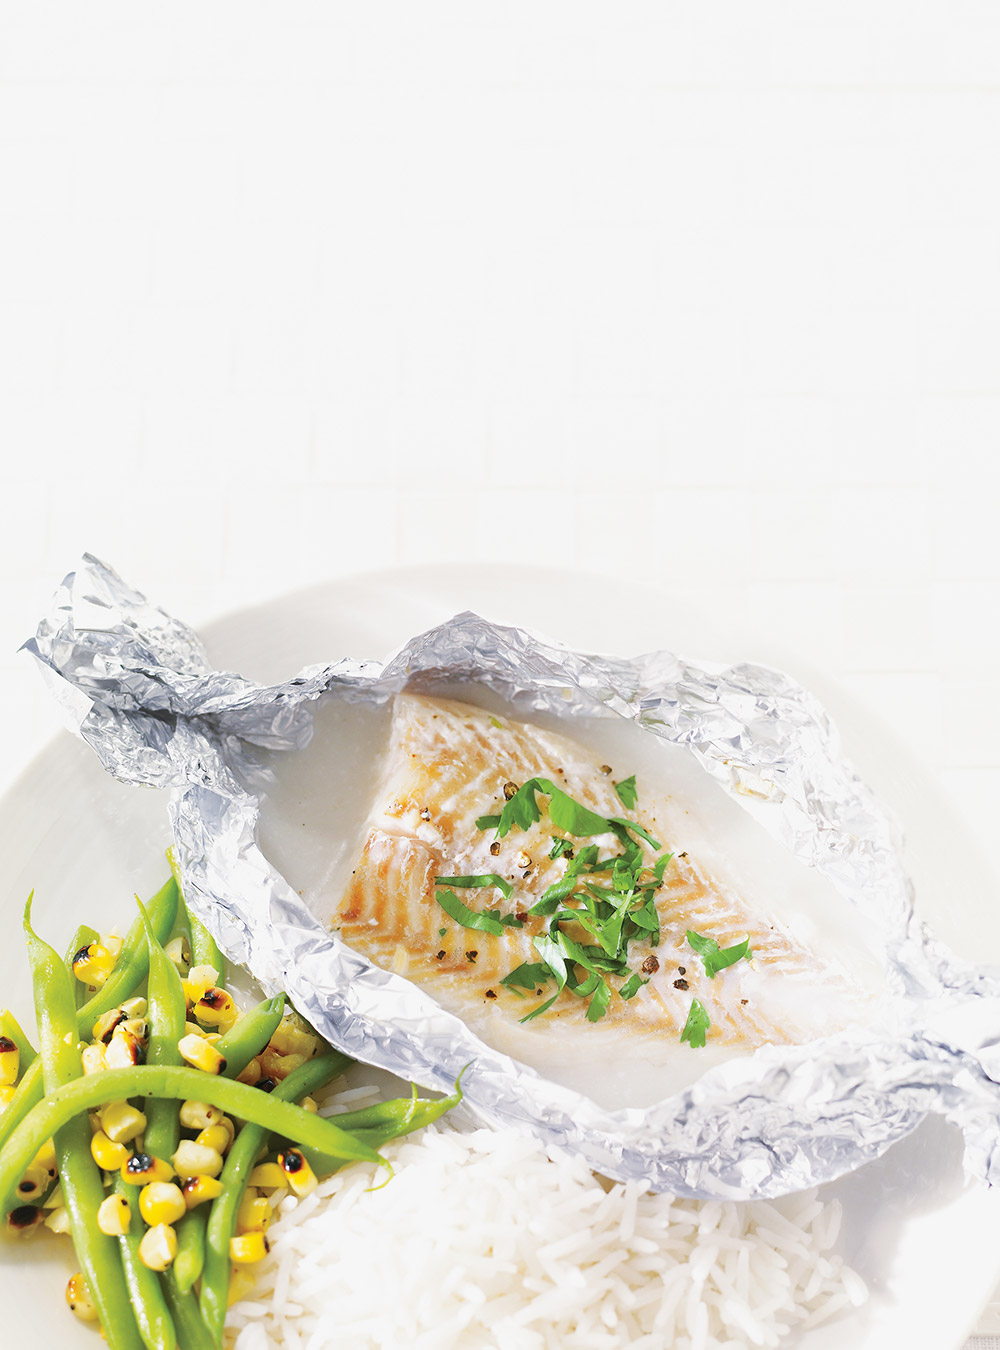 Haddock Papillotes with Coconut Milk